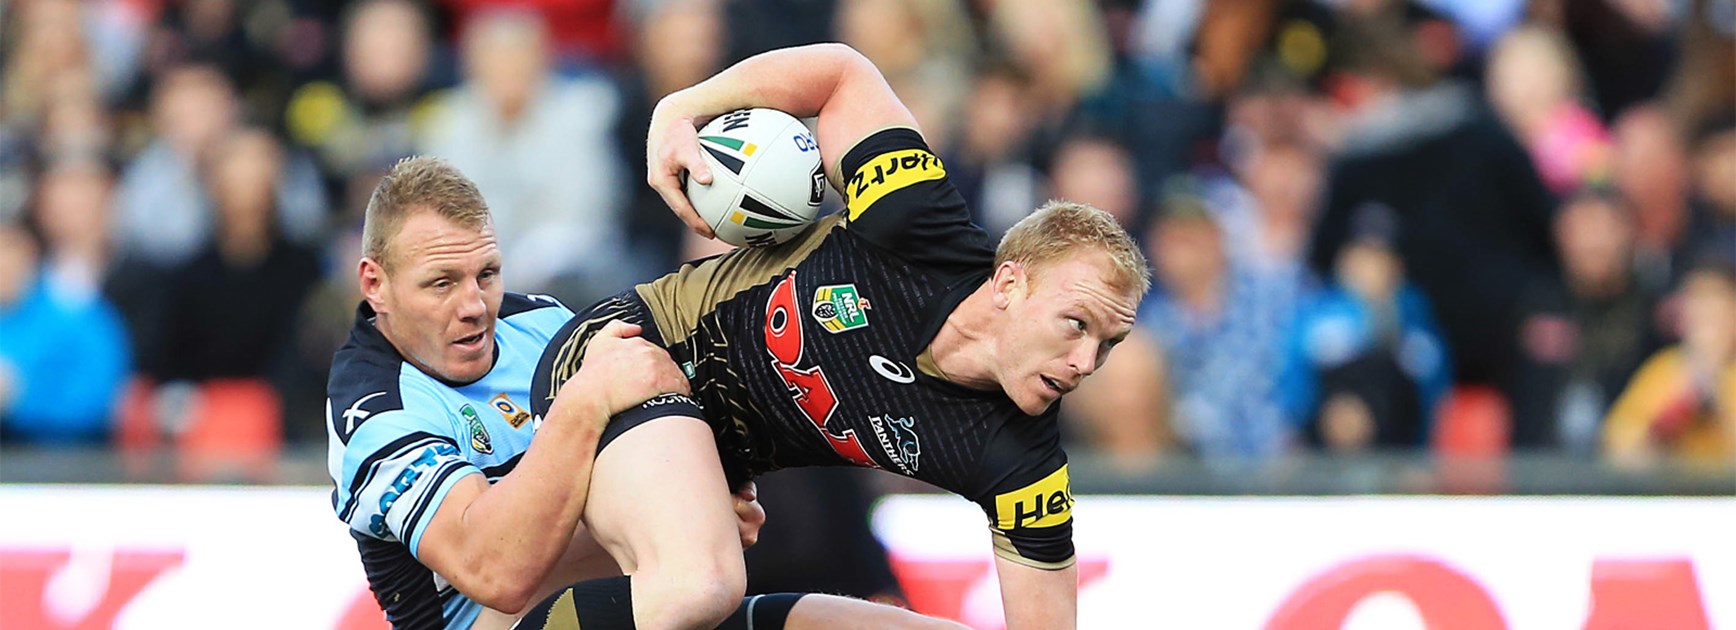 Cronulla's Luke Lewis tackles Penrith's Peter Wallace on Sunday afternoon.